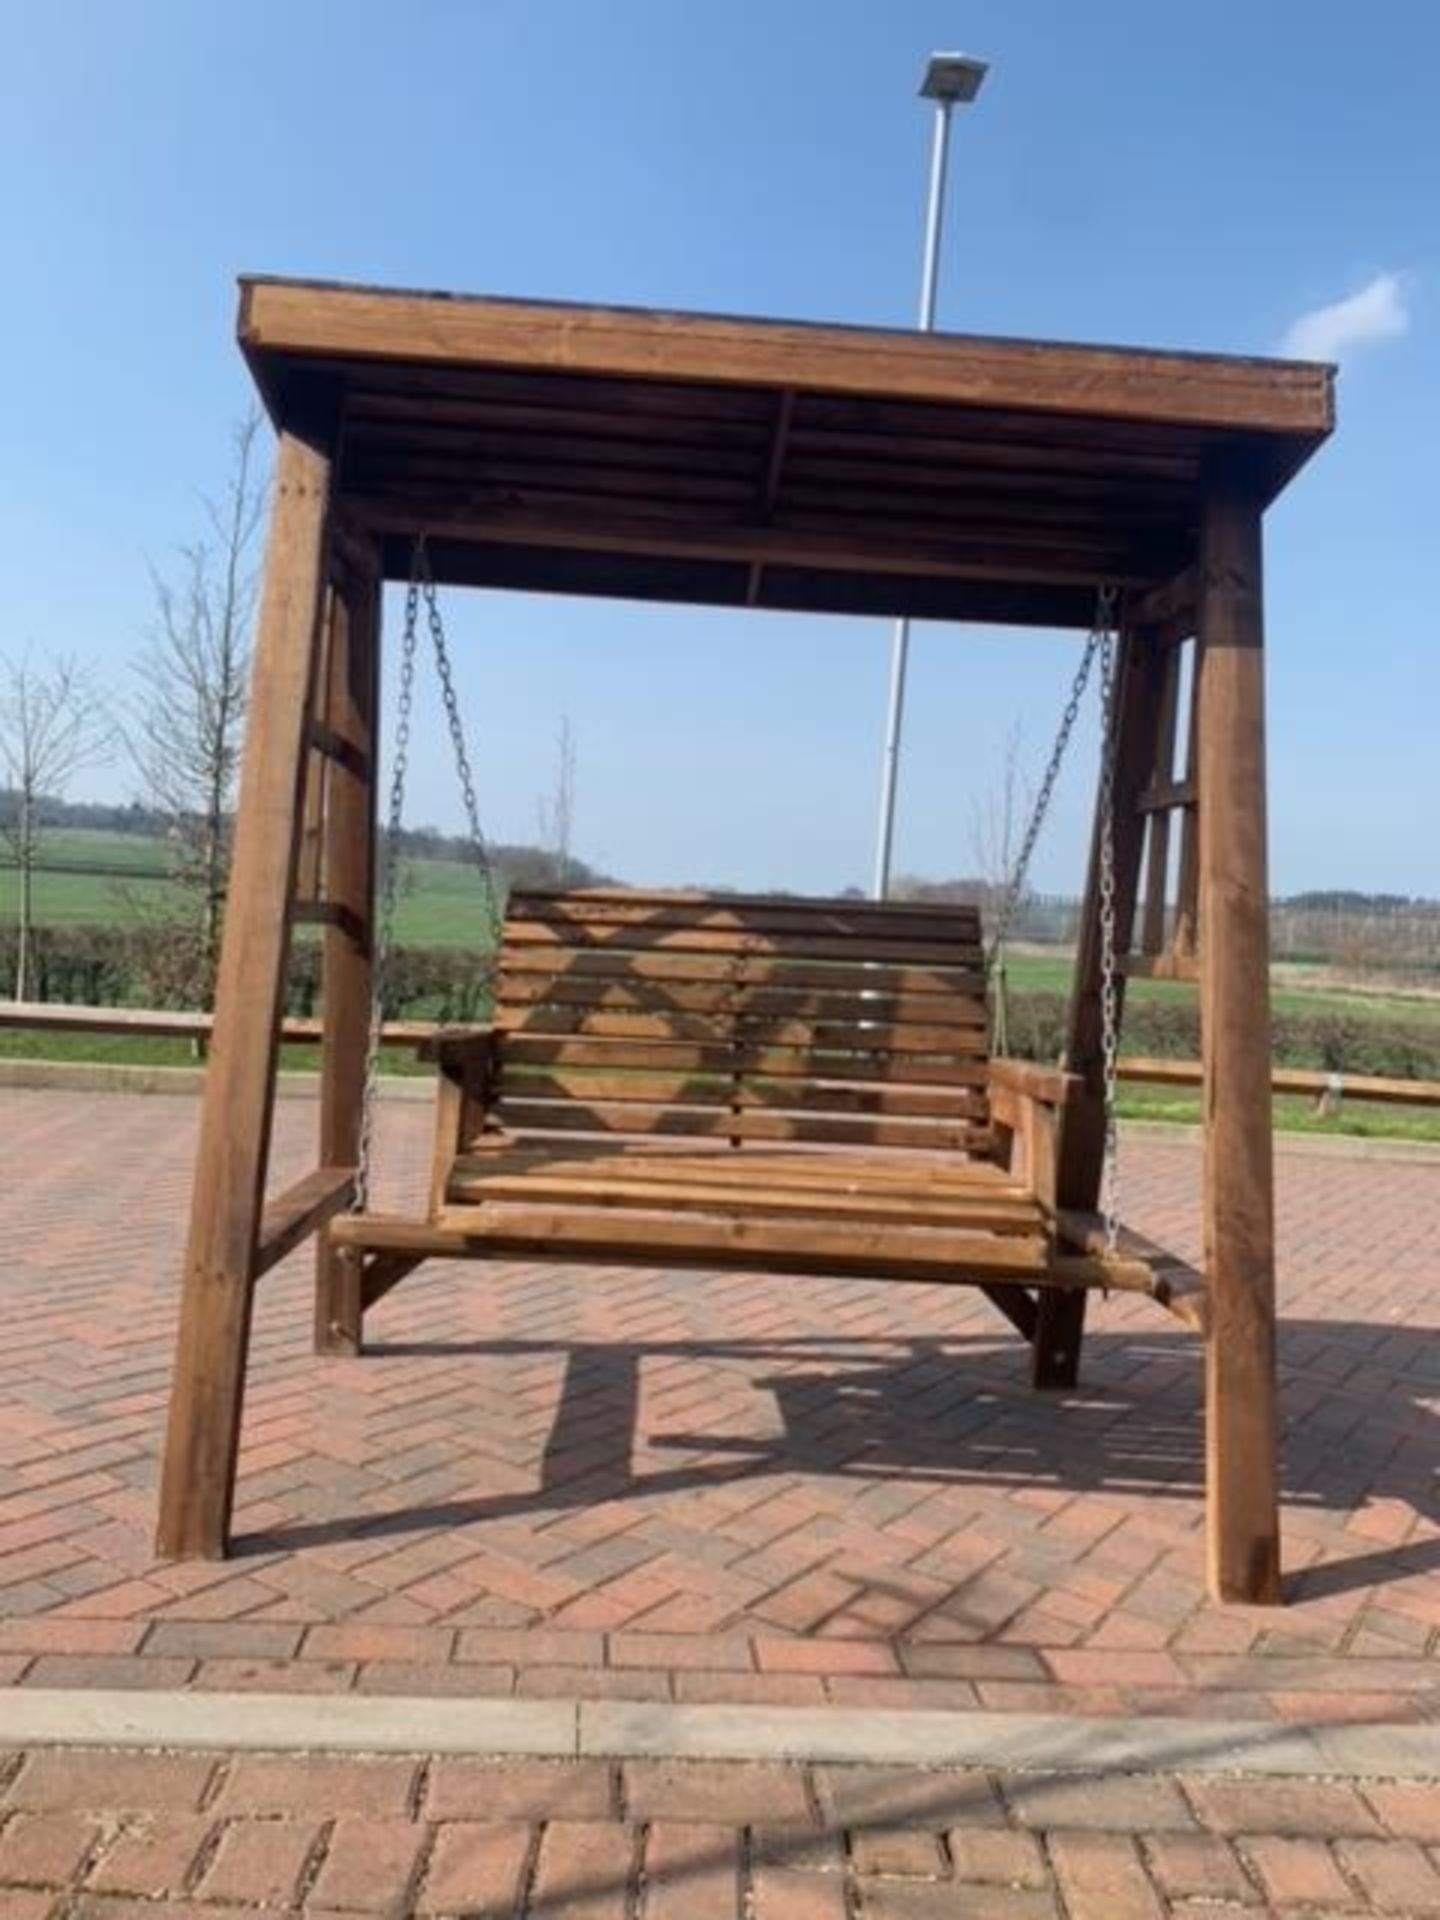 BRAND NEW QUALITY Swing bench Handcrafted Garden Furniture. 2 Seater Swing bench *NO VAT* - Image 2 of 3